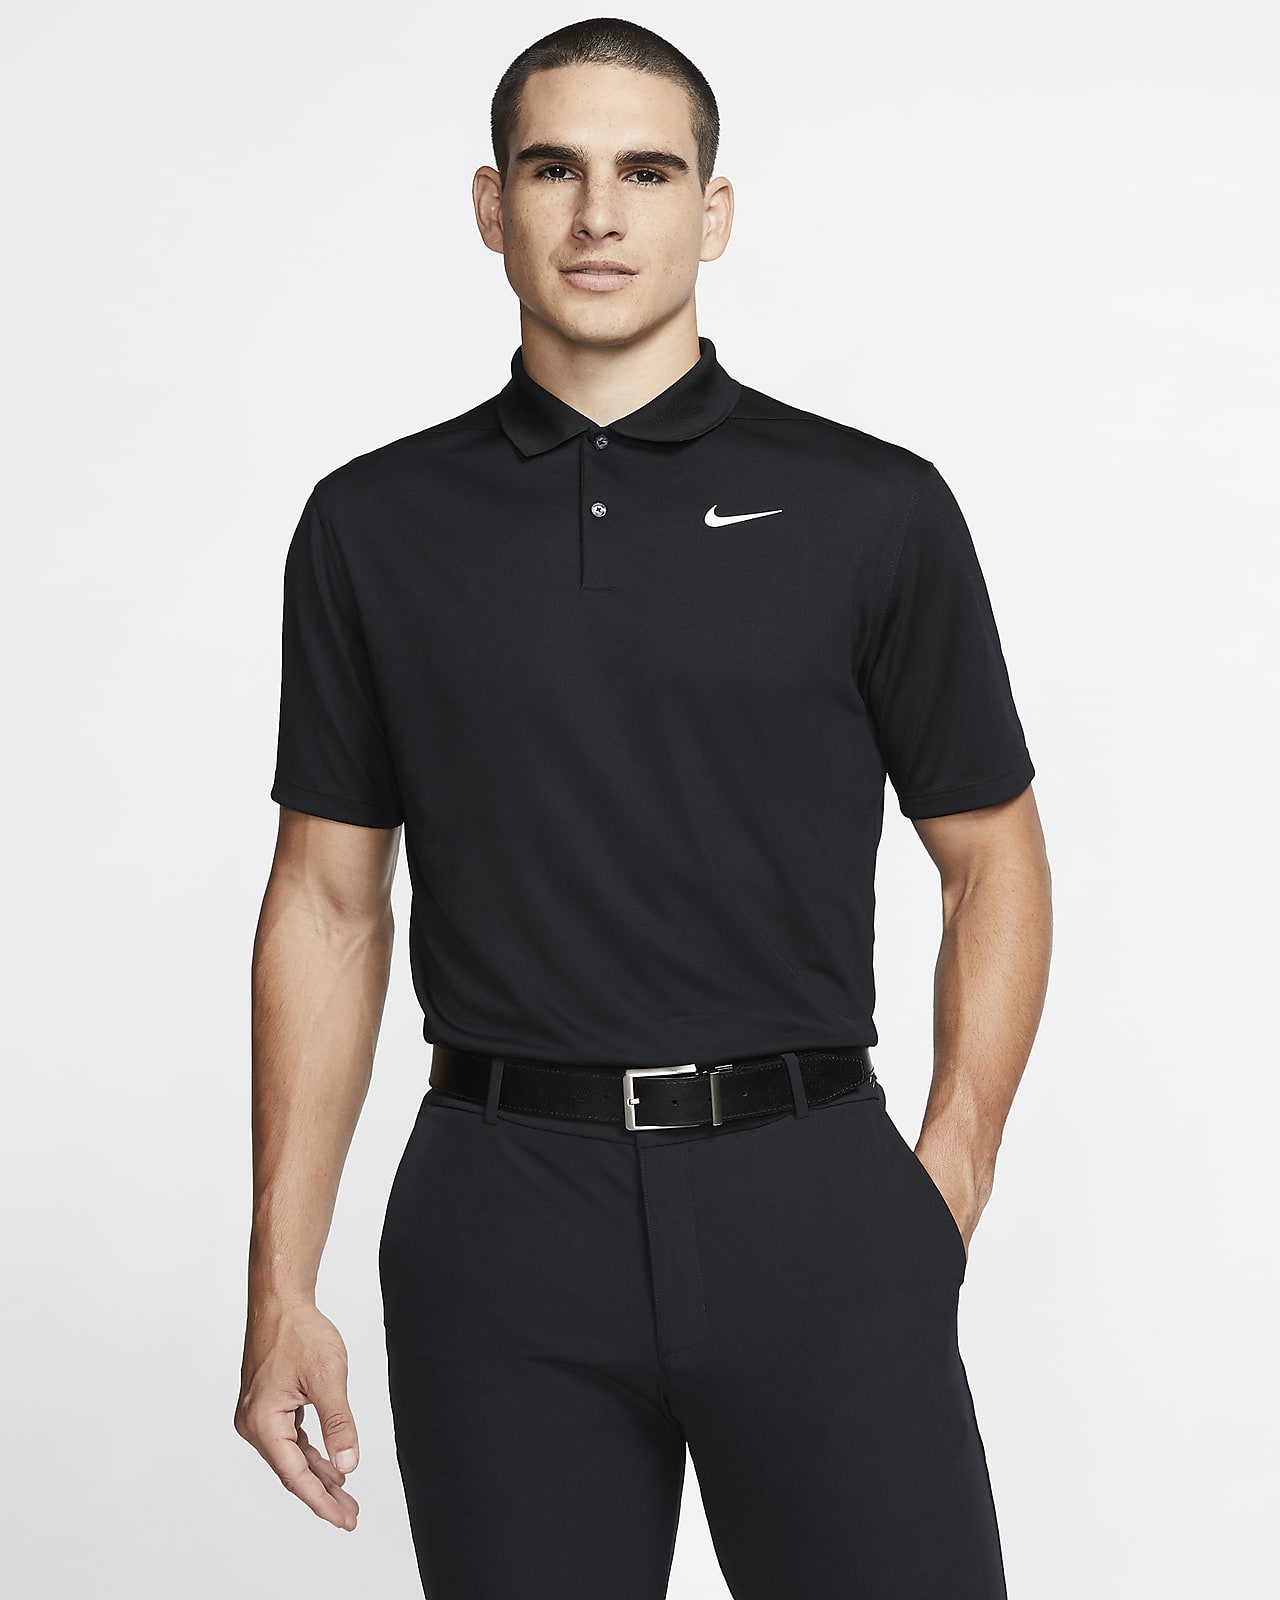 Pío suficiente Oscurecer Nike Fitted Golf Shirts Sale Online, SAVE 50% - mpgc.net